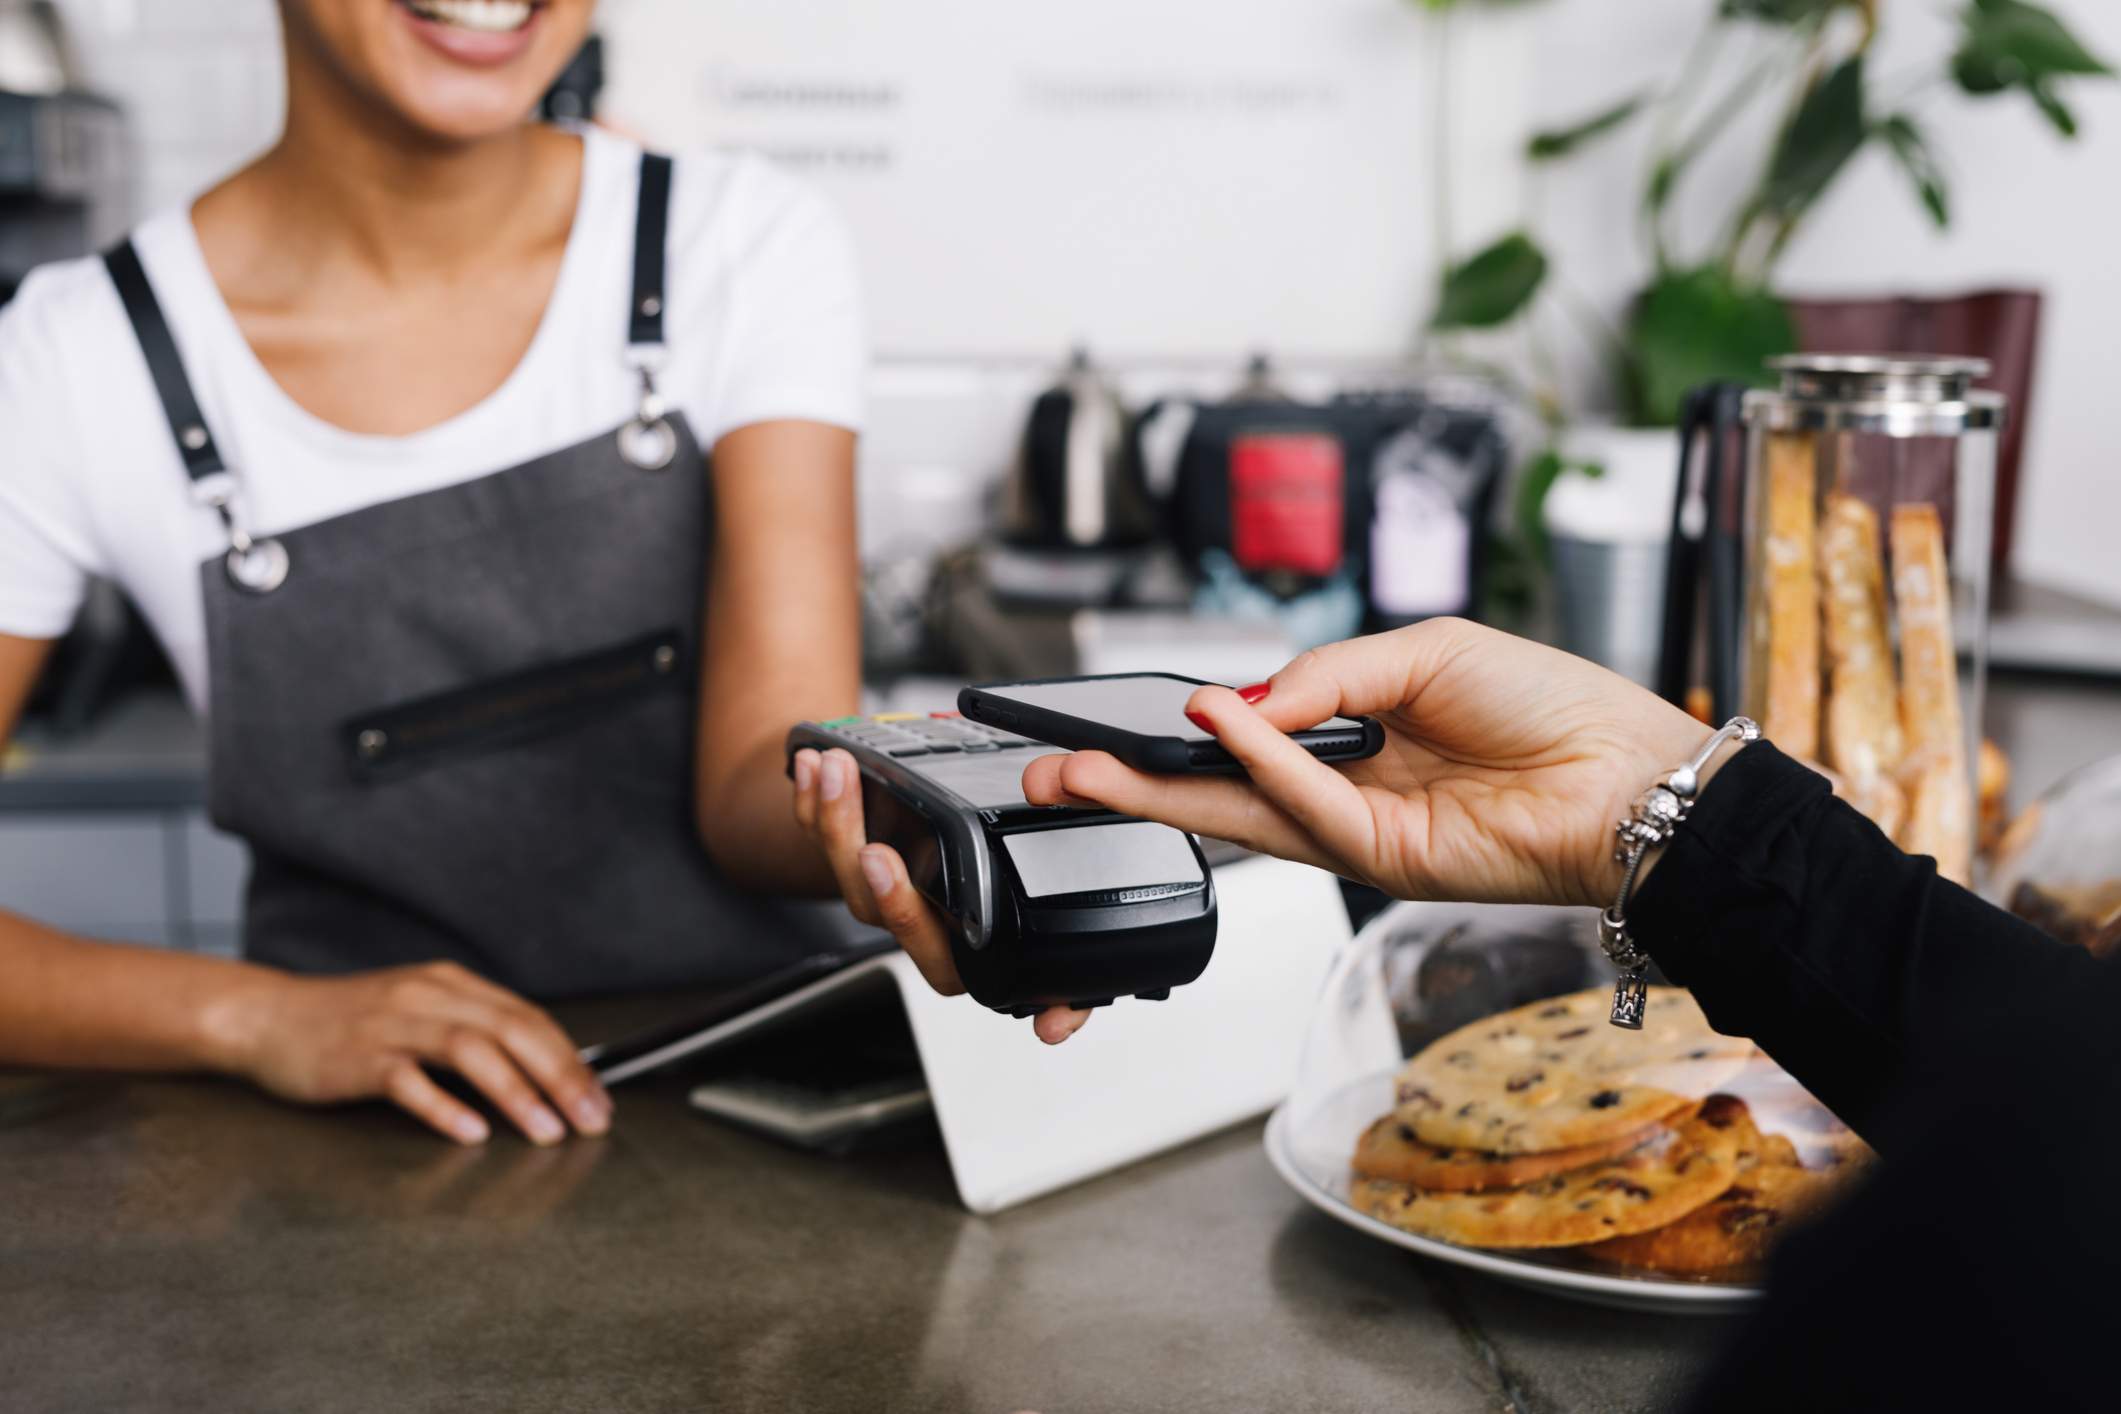 Image depicts a restaurant guest out of frame paying for a meal with a credit card. The server is holding out a point of sale system.